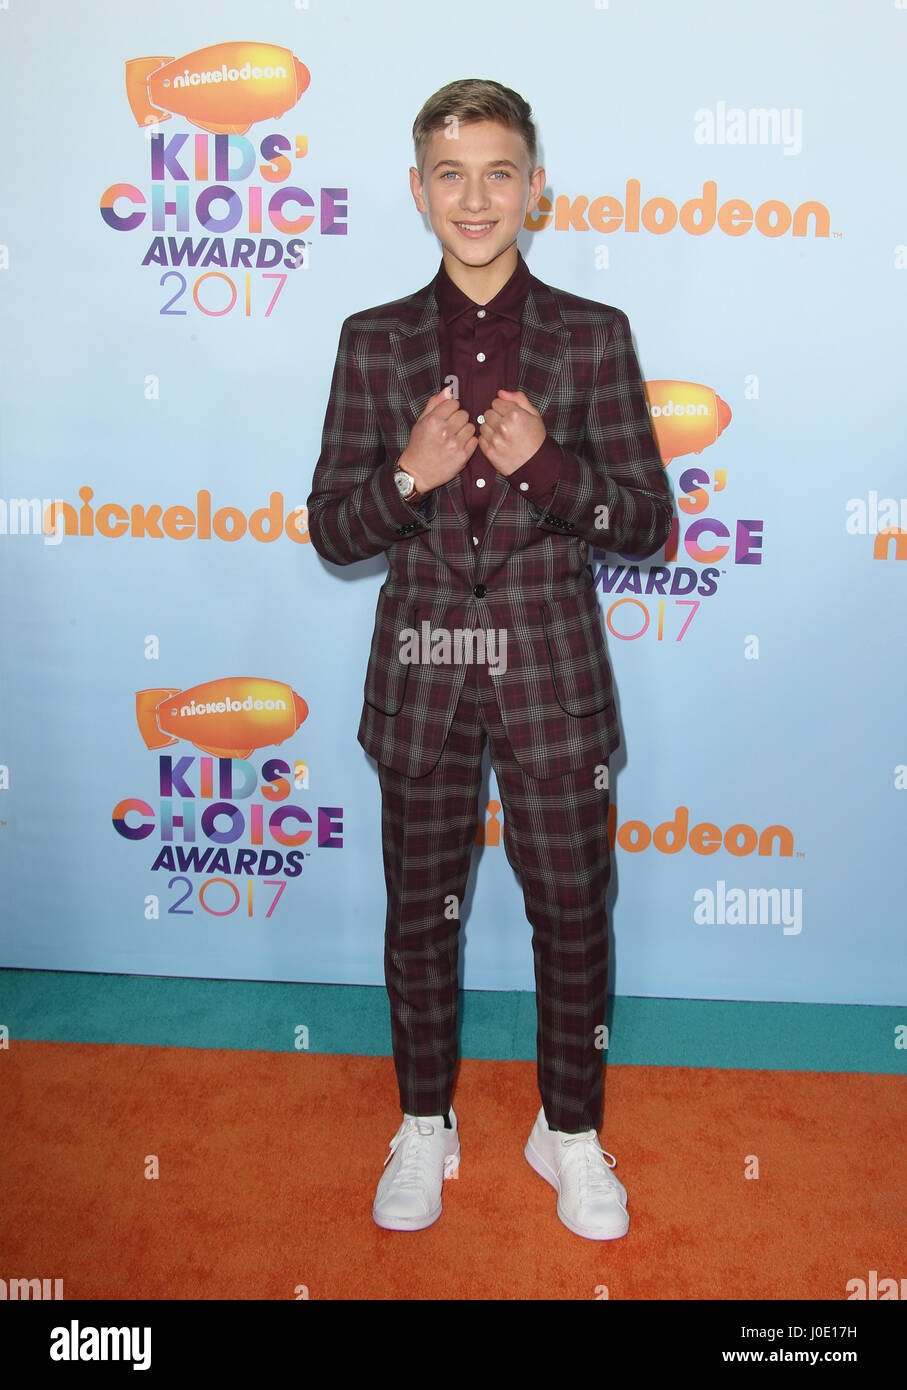 Nickelodeon's 2017 Kids' Choice Awards - Arrivals  Featuring: Thomas Kuc Where: Los Angeles, California, United States When: 12 Mar 2017 Stock Photo